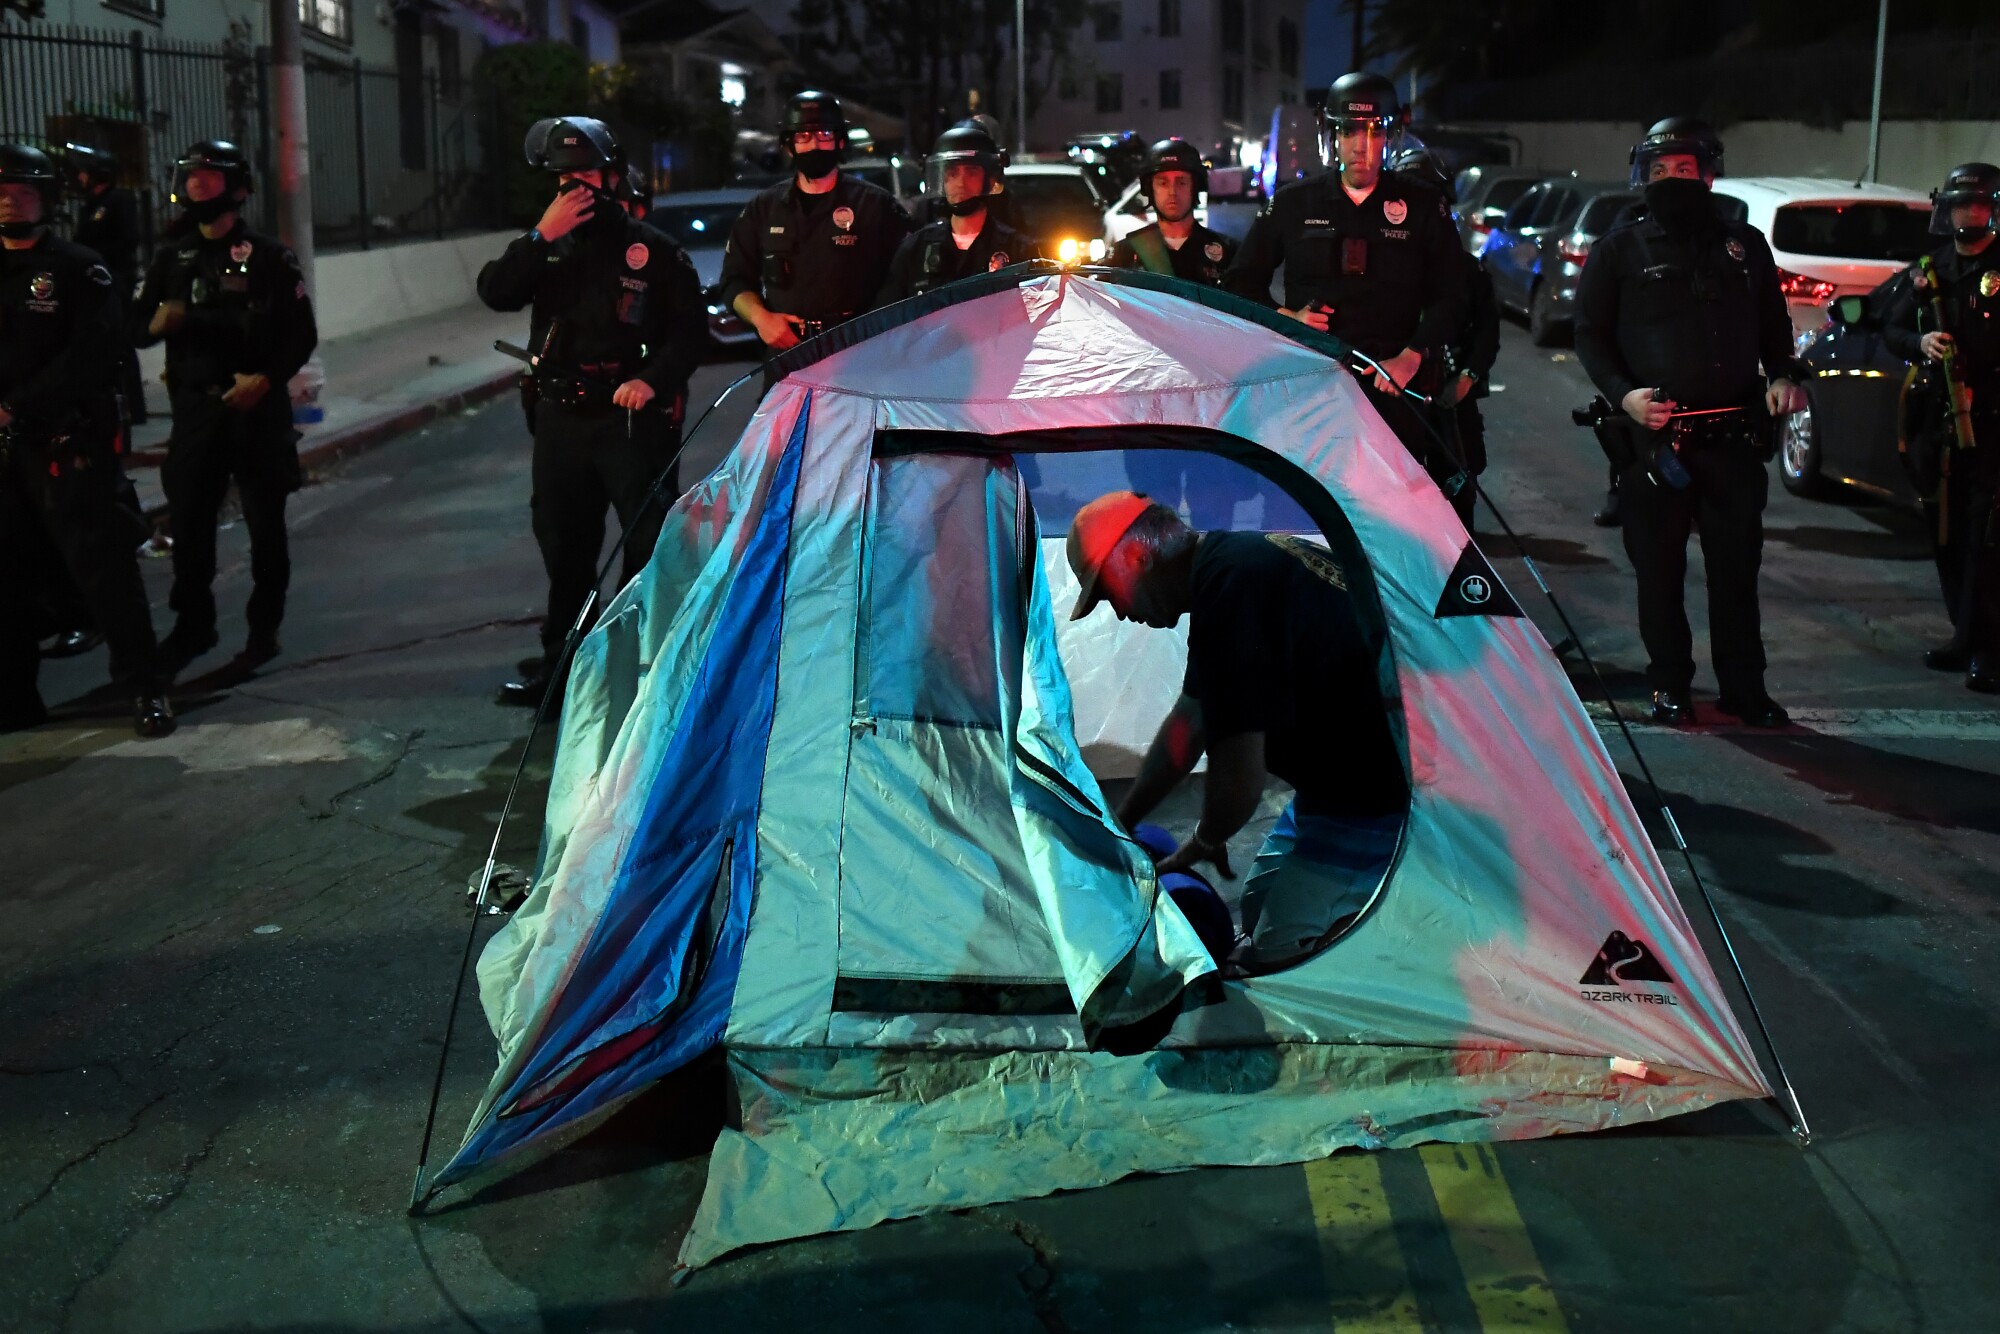 A protester sets up a tent as LAPD officers stand guard.